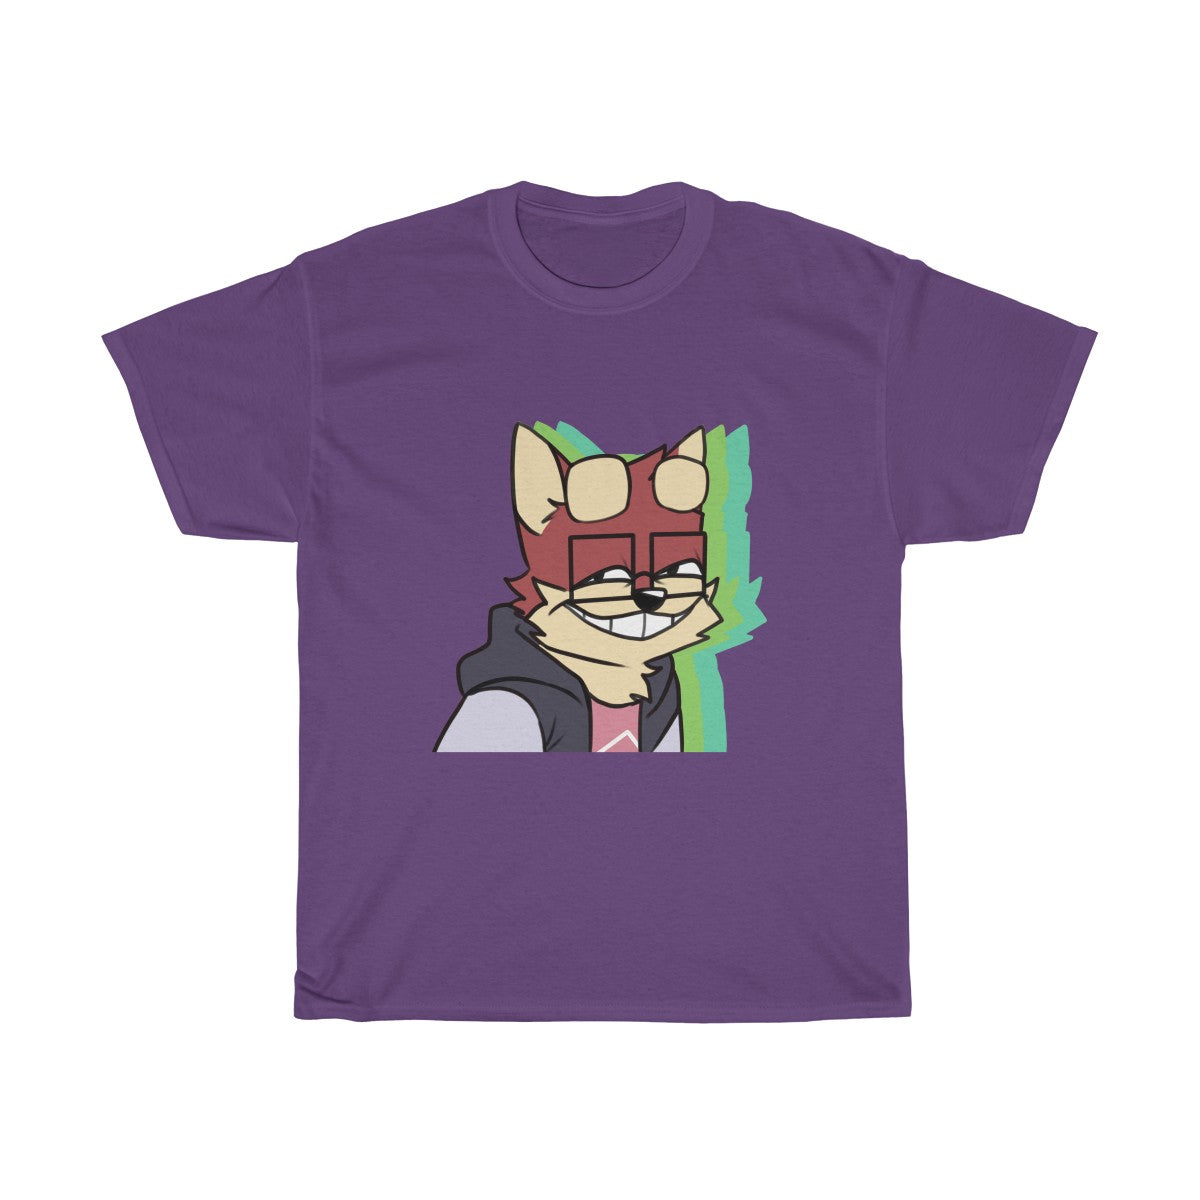 Thinking About You - T-Shirt T-Shirt Ooka Purple S 